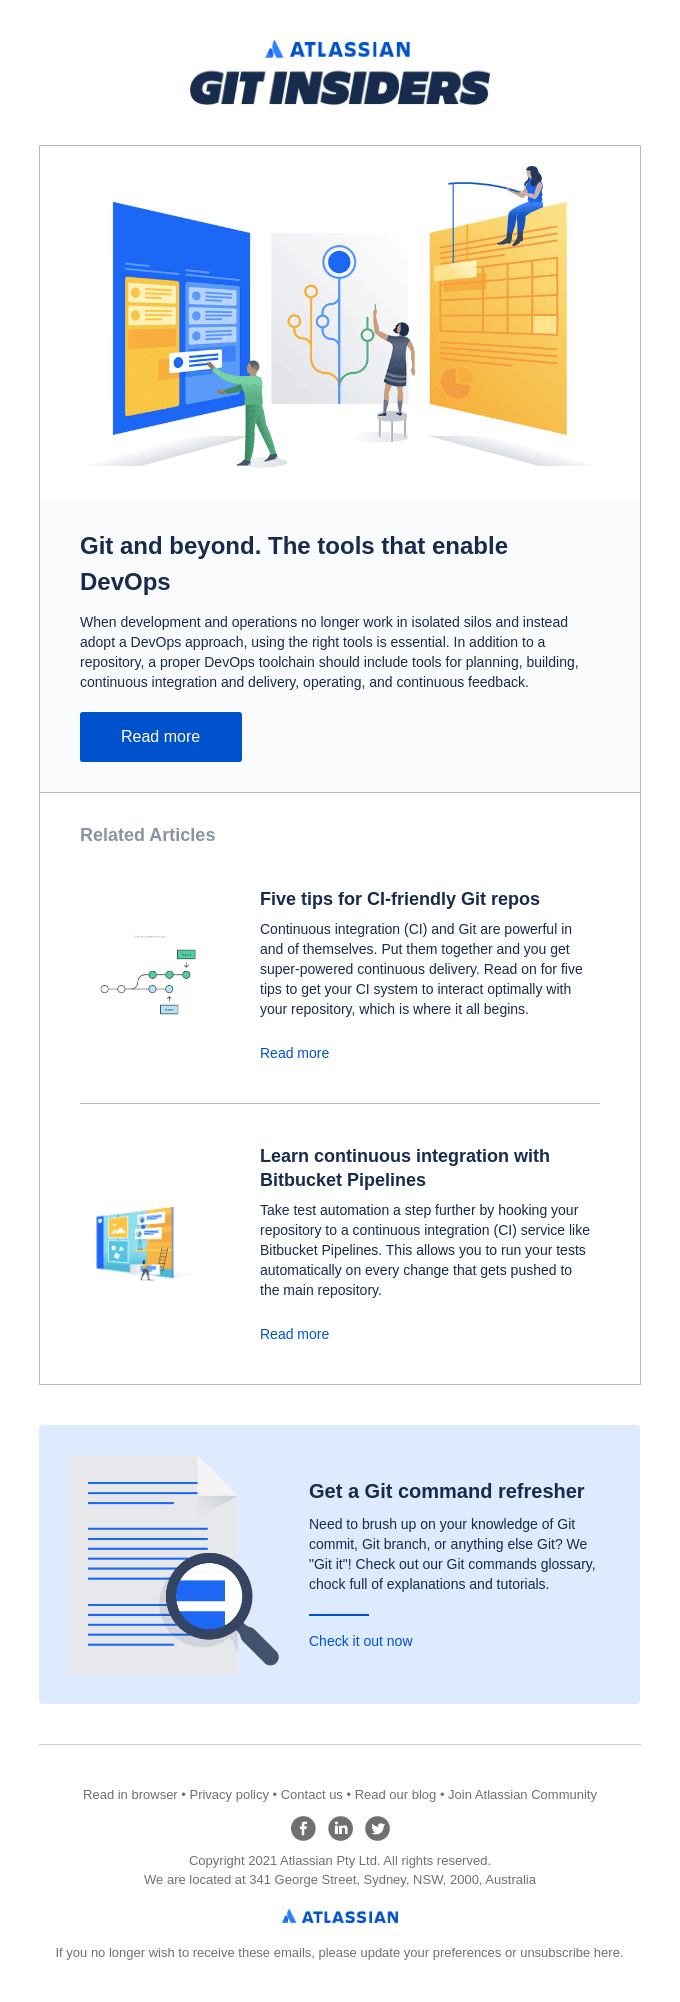 How Git and other tools enable and empower DevOps teams - Atlassian Email Newsletter